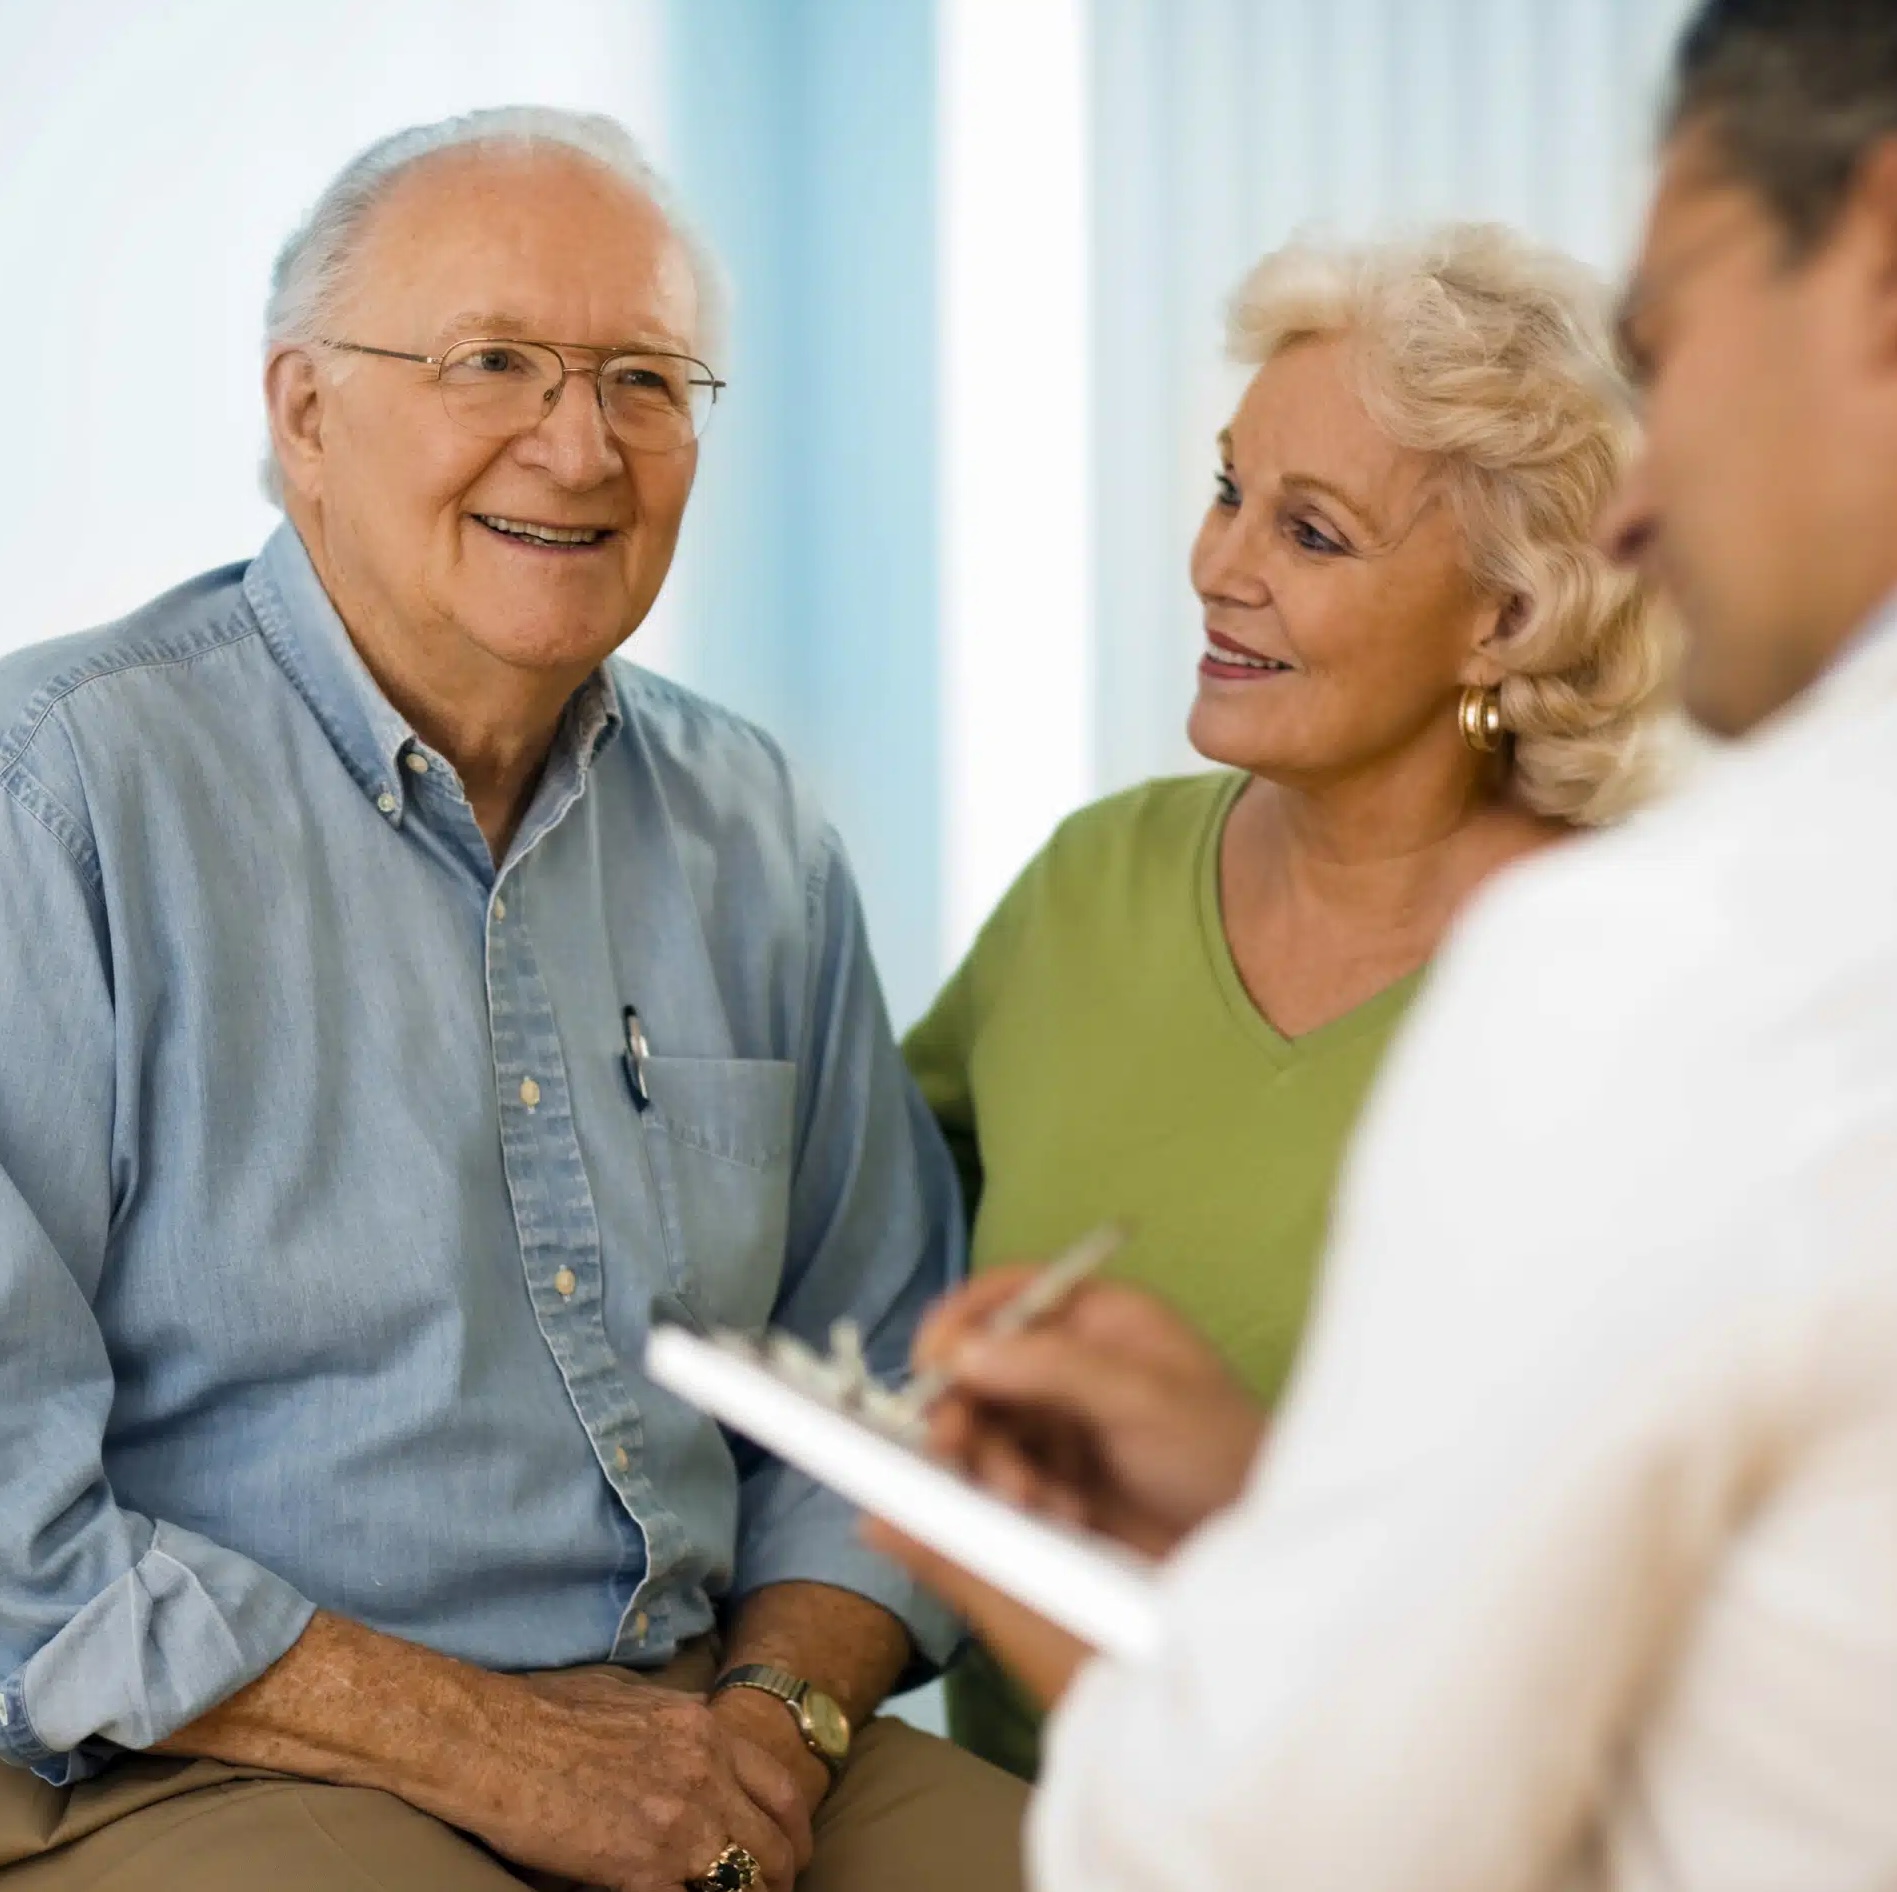 Photograph of a senior couple at the doctor